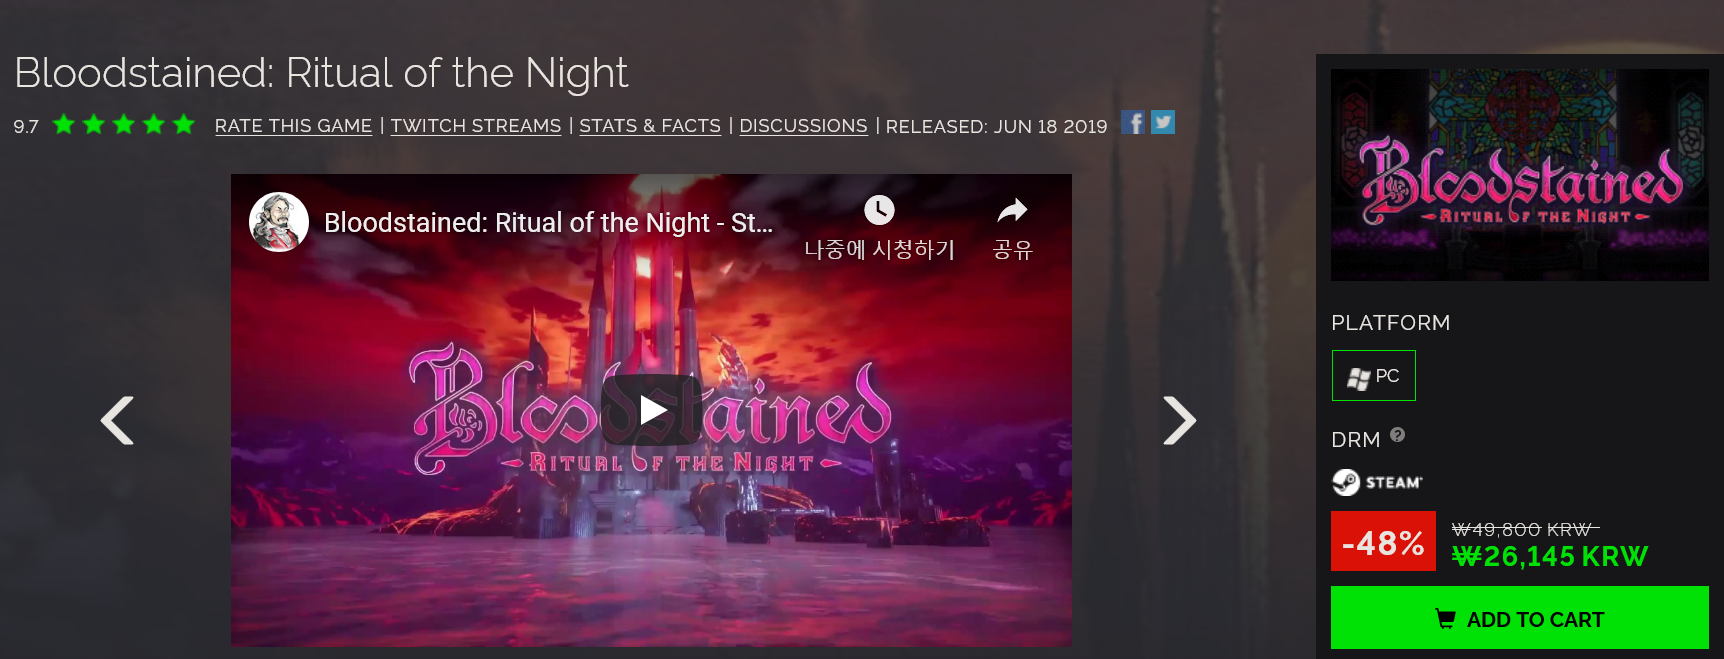 Screenshot_2019-12-23 Bloodstained Ritual of the Night PC - Steam Game Keys.png